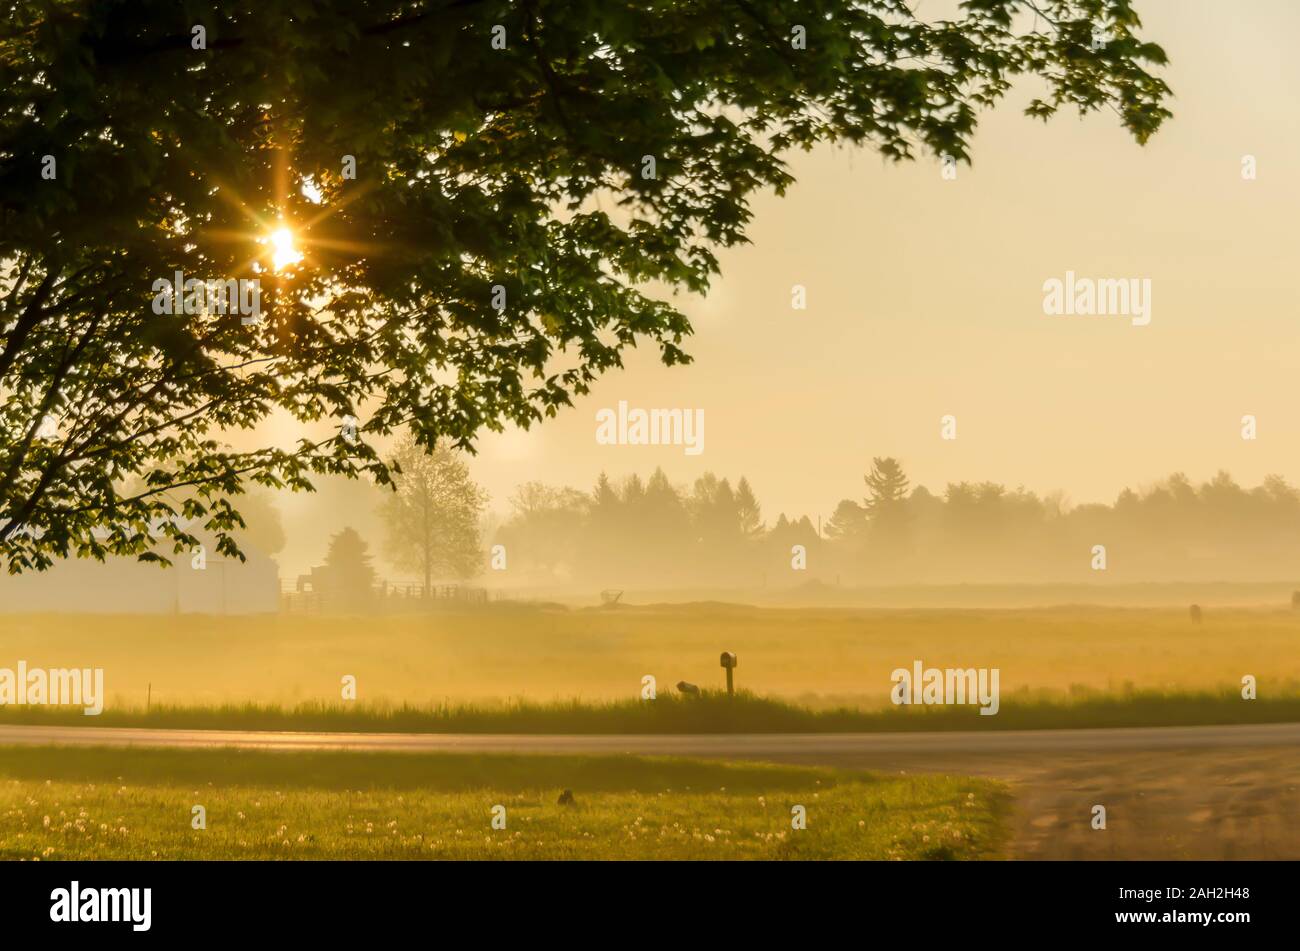 A starburst/sun flare/sunstar/star effect caused by sunlight passing through the leaves of a tree. Horses are grazing in the pasture in the background. Stock Photo